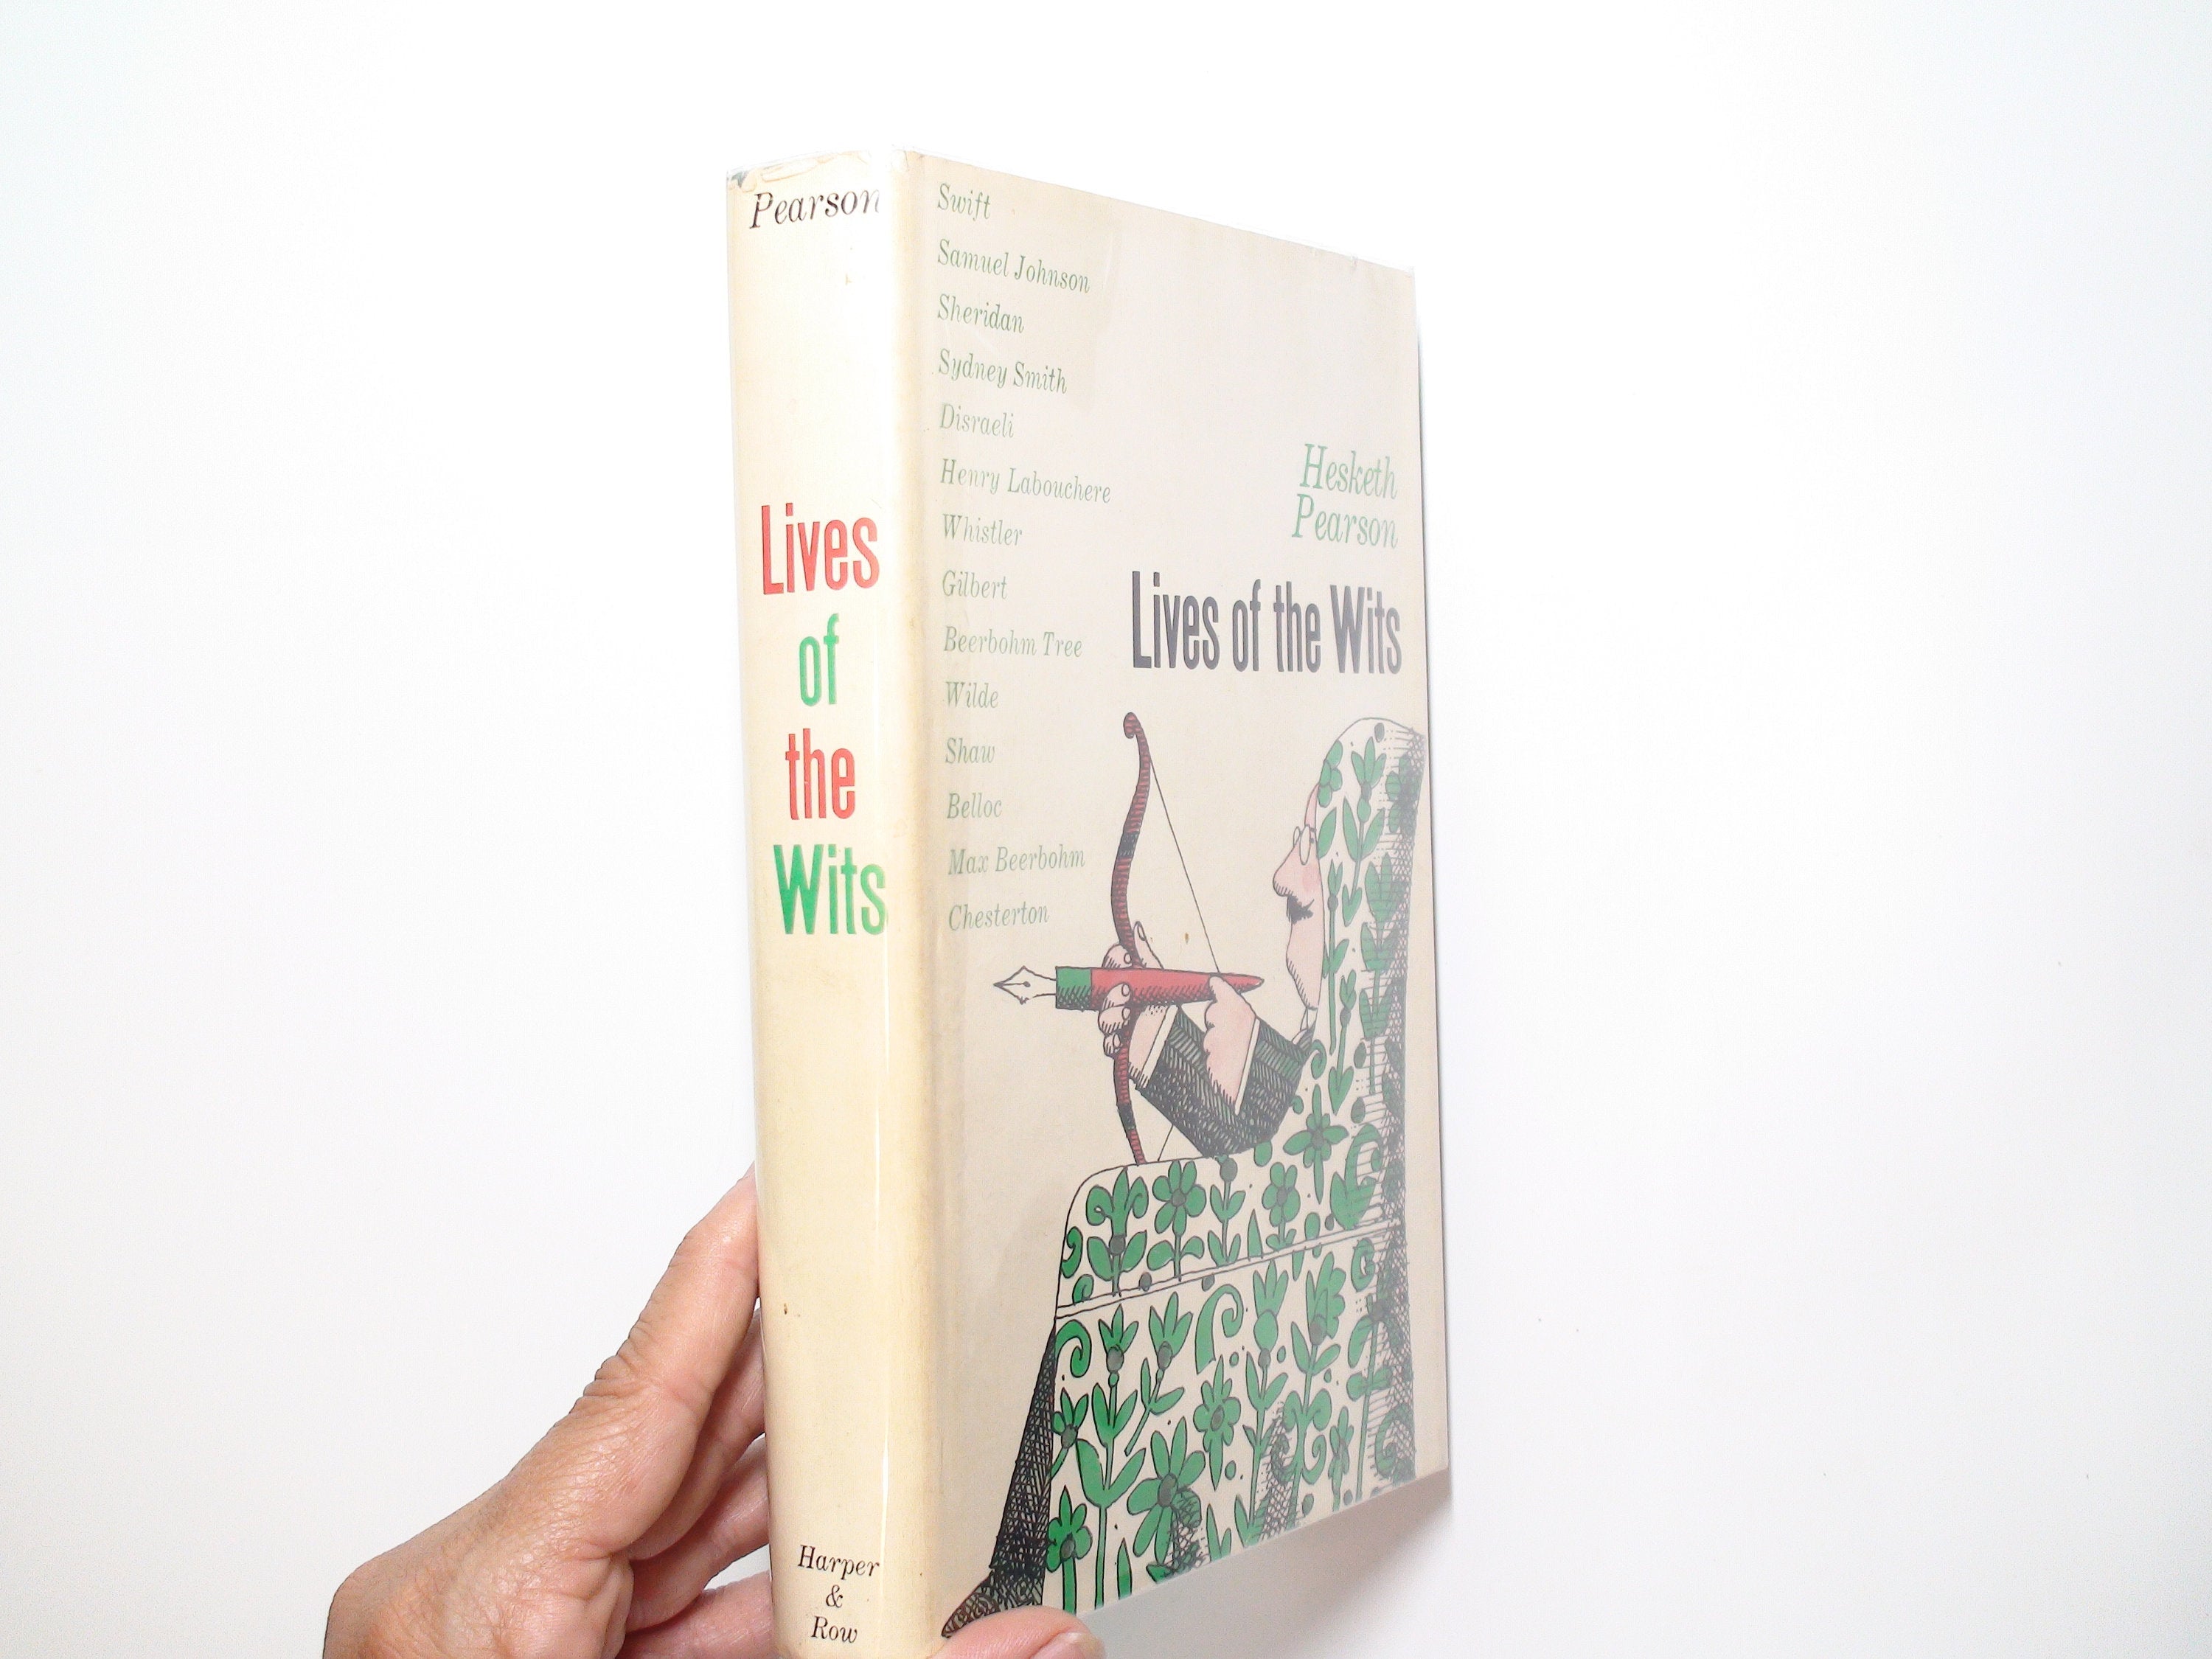 Lives of the Wits, Hesketh Pearson, Hardcover w D/J, 1st Ed, Illustrated, 1962